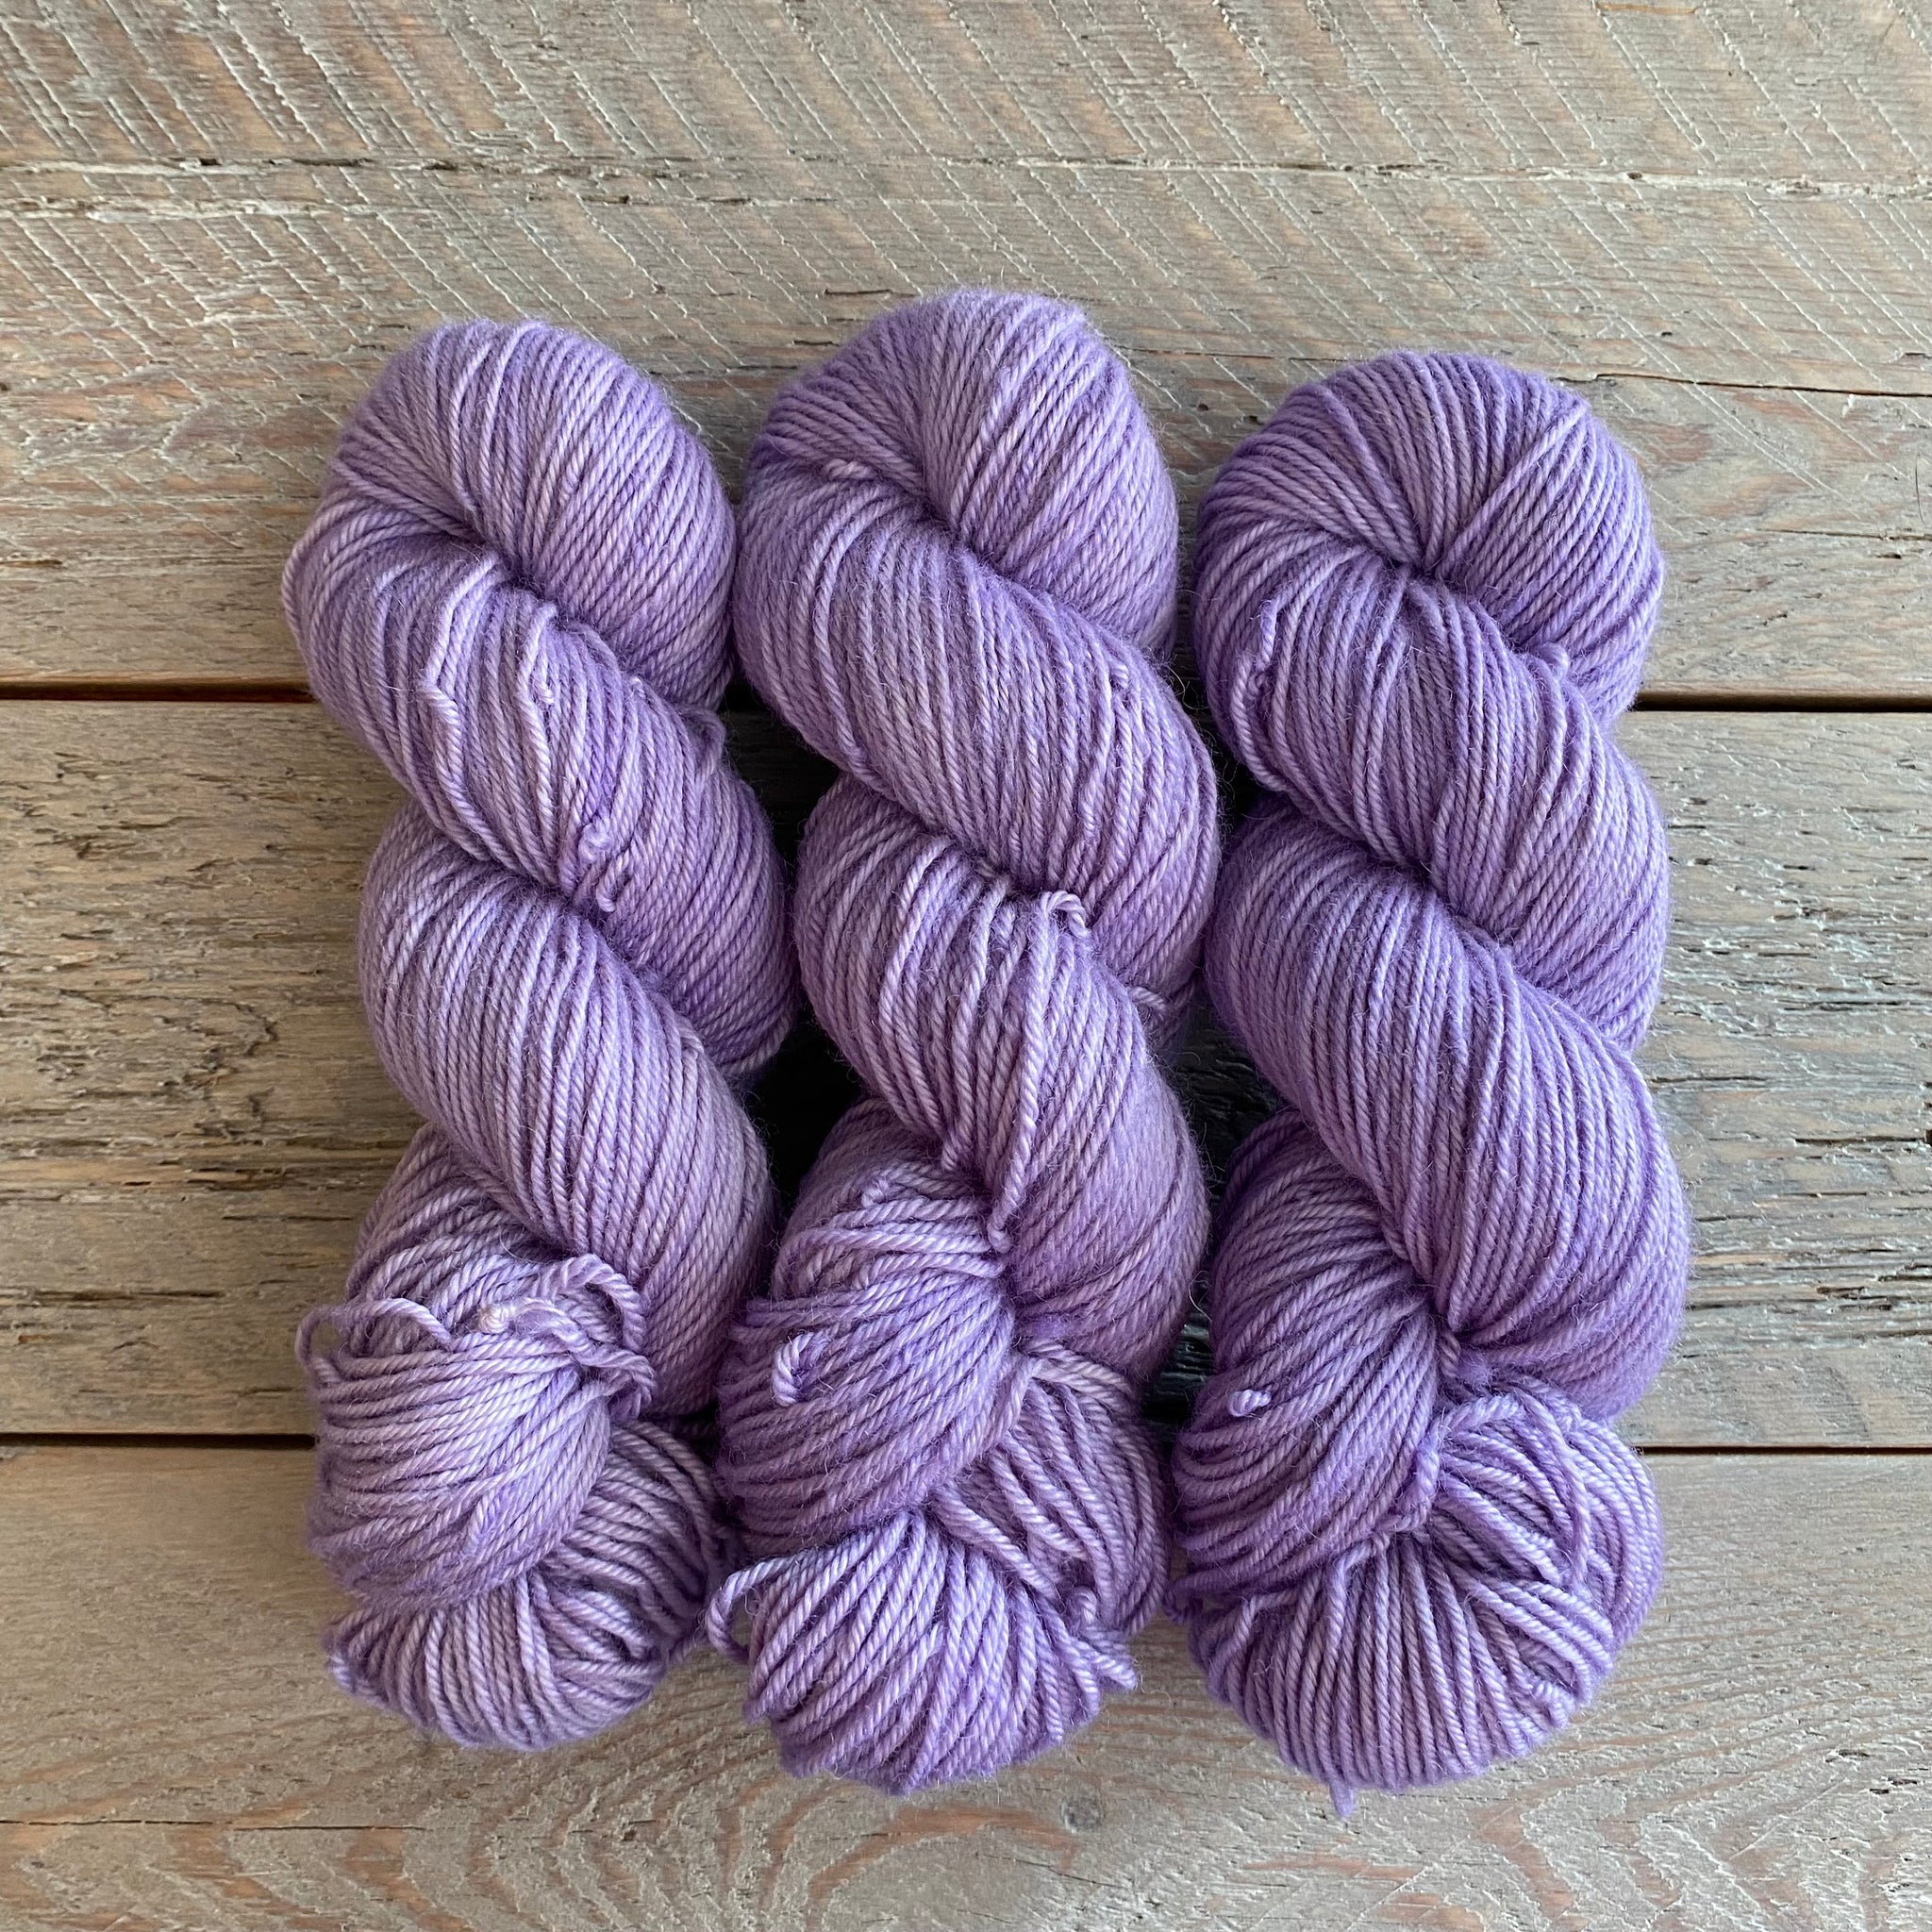 Aster on BFL Worsted